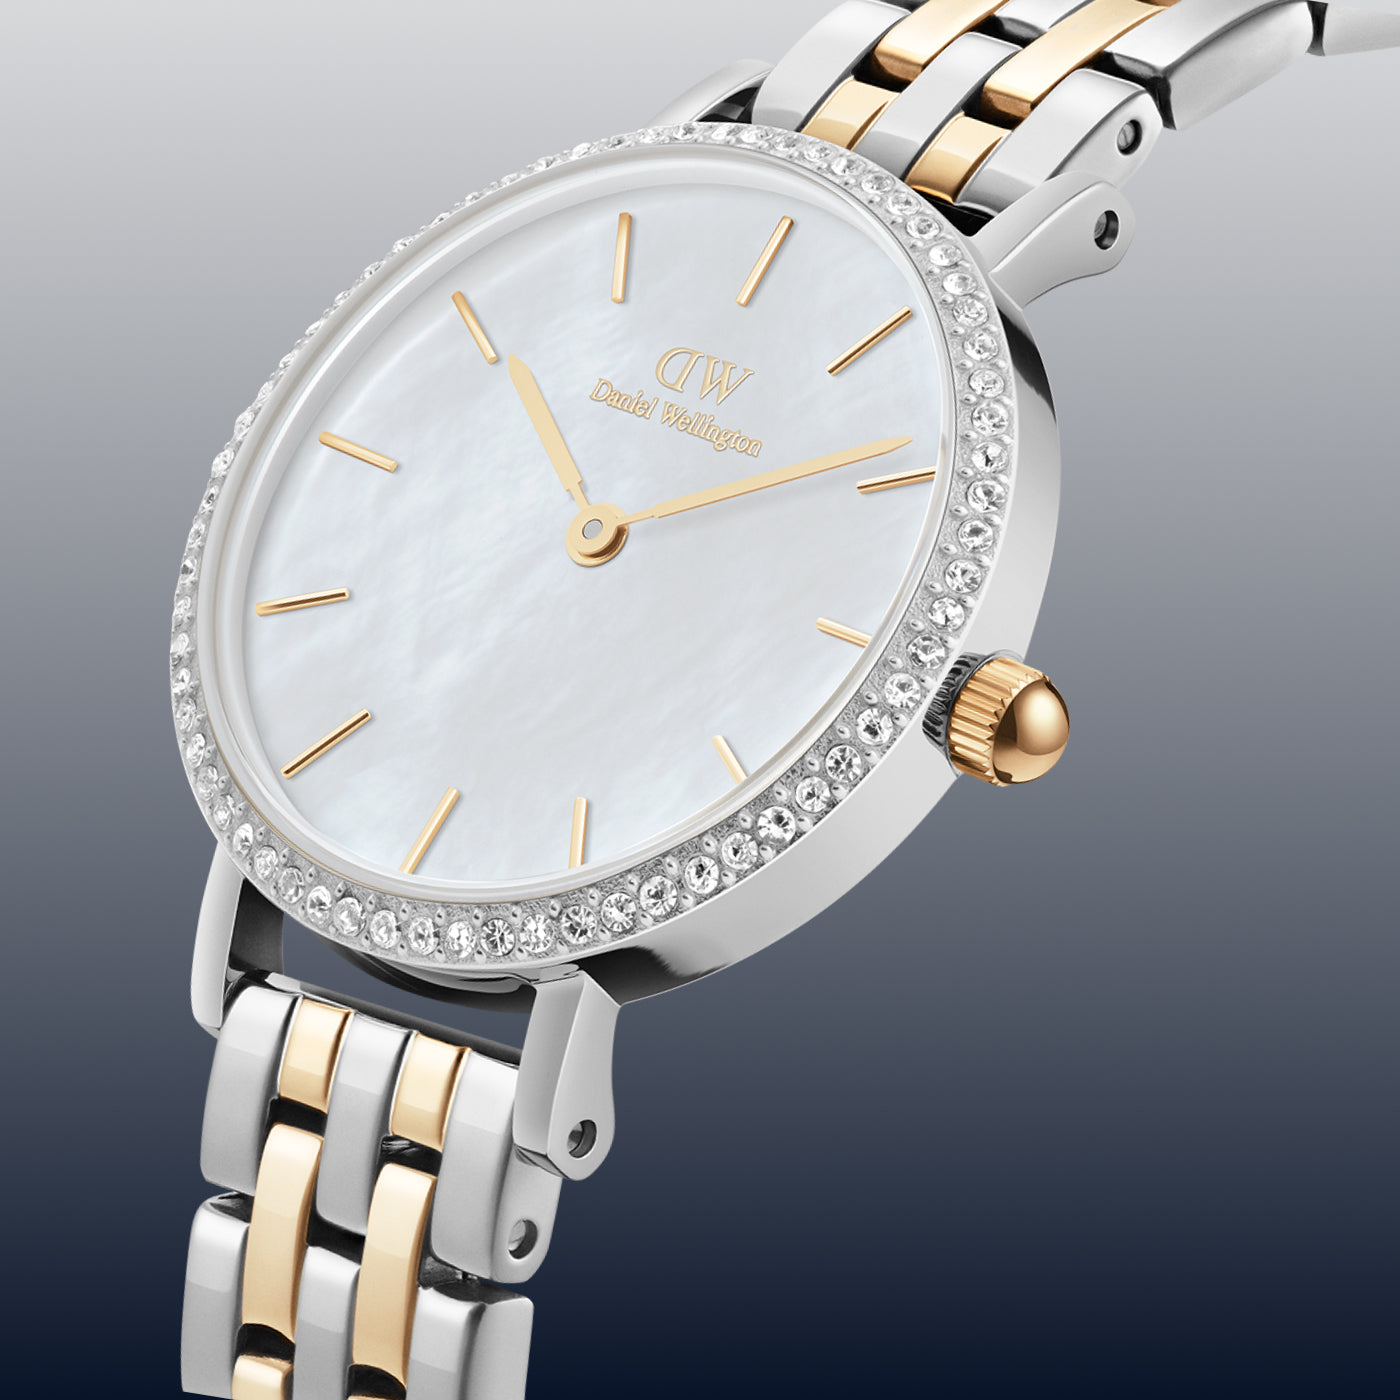 Petite Sheffield - Women's white watch with rose gold | DW